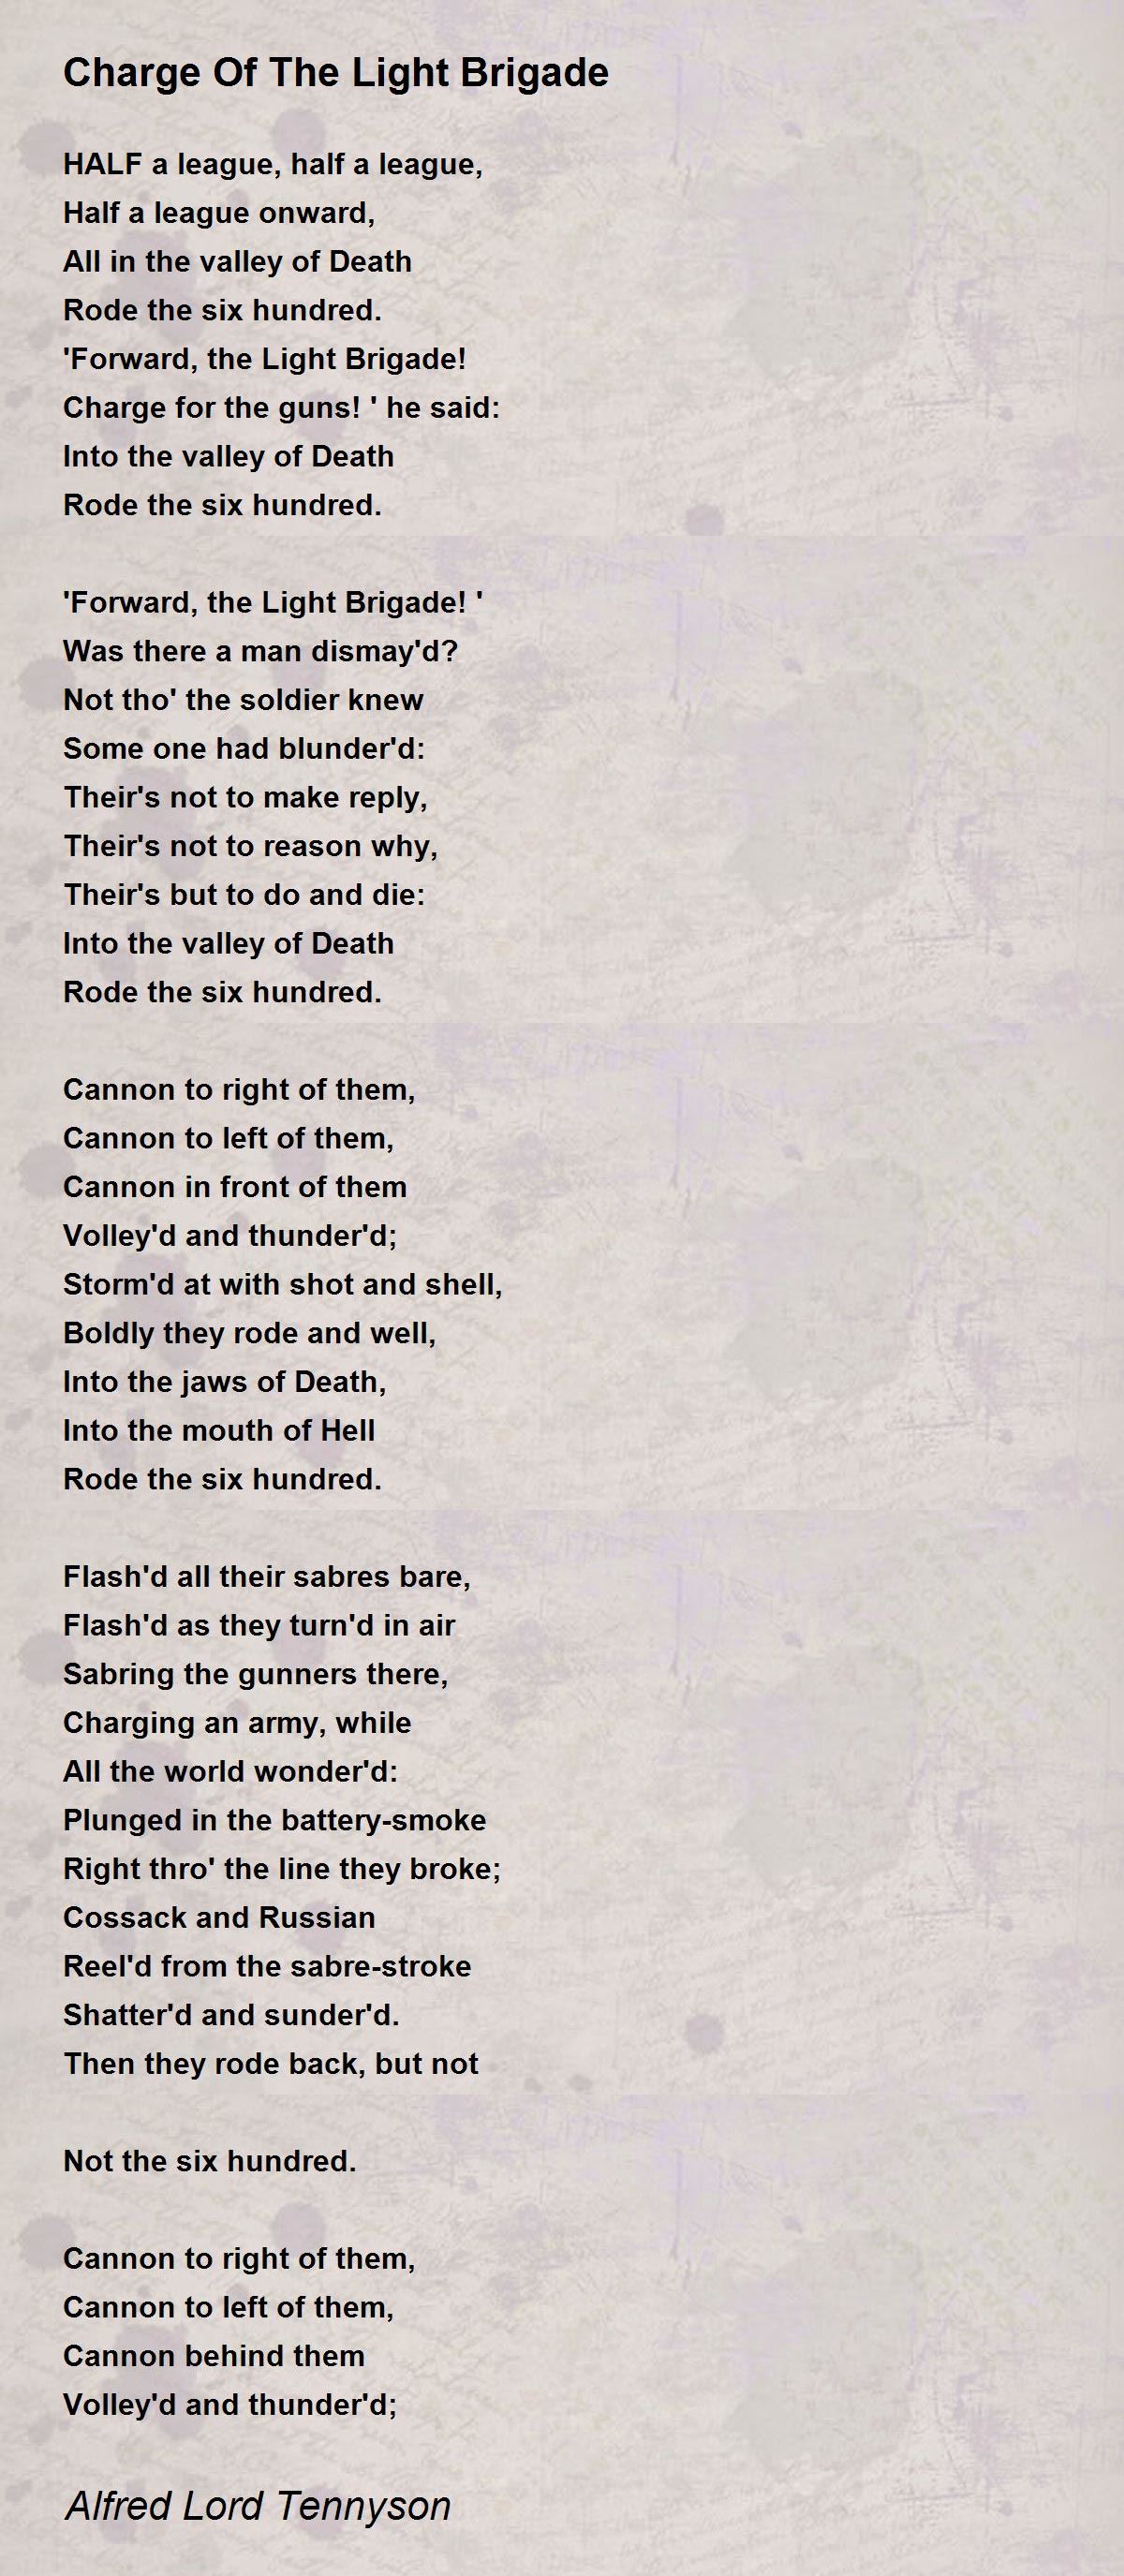 Charge Of The Light Brigade - Charge Of The Light Brigade Alfred Lord Tennyson